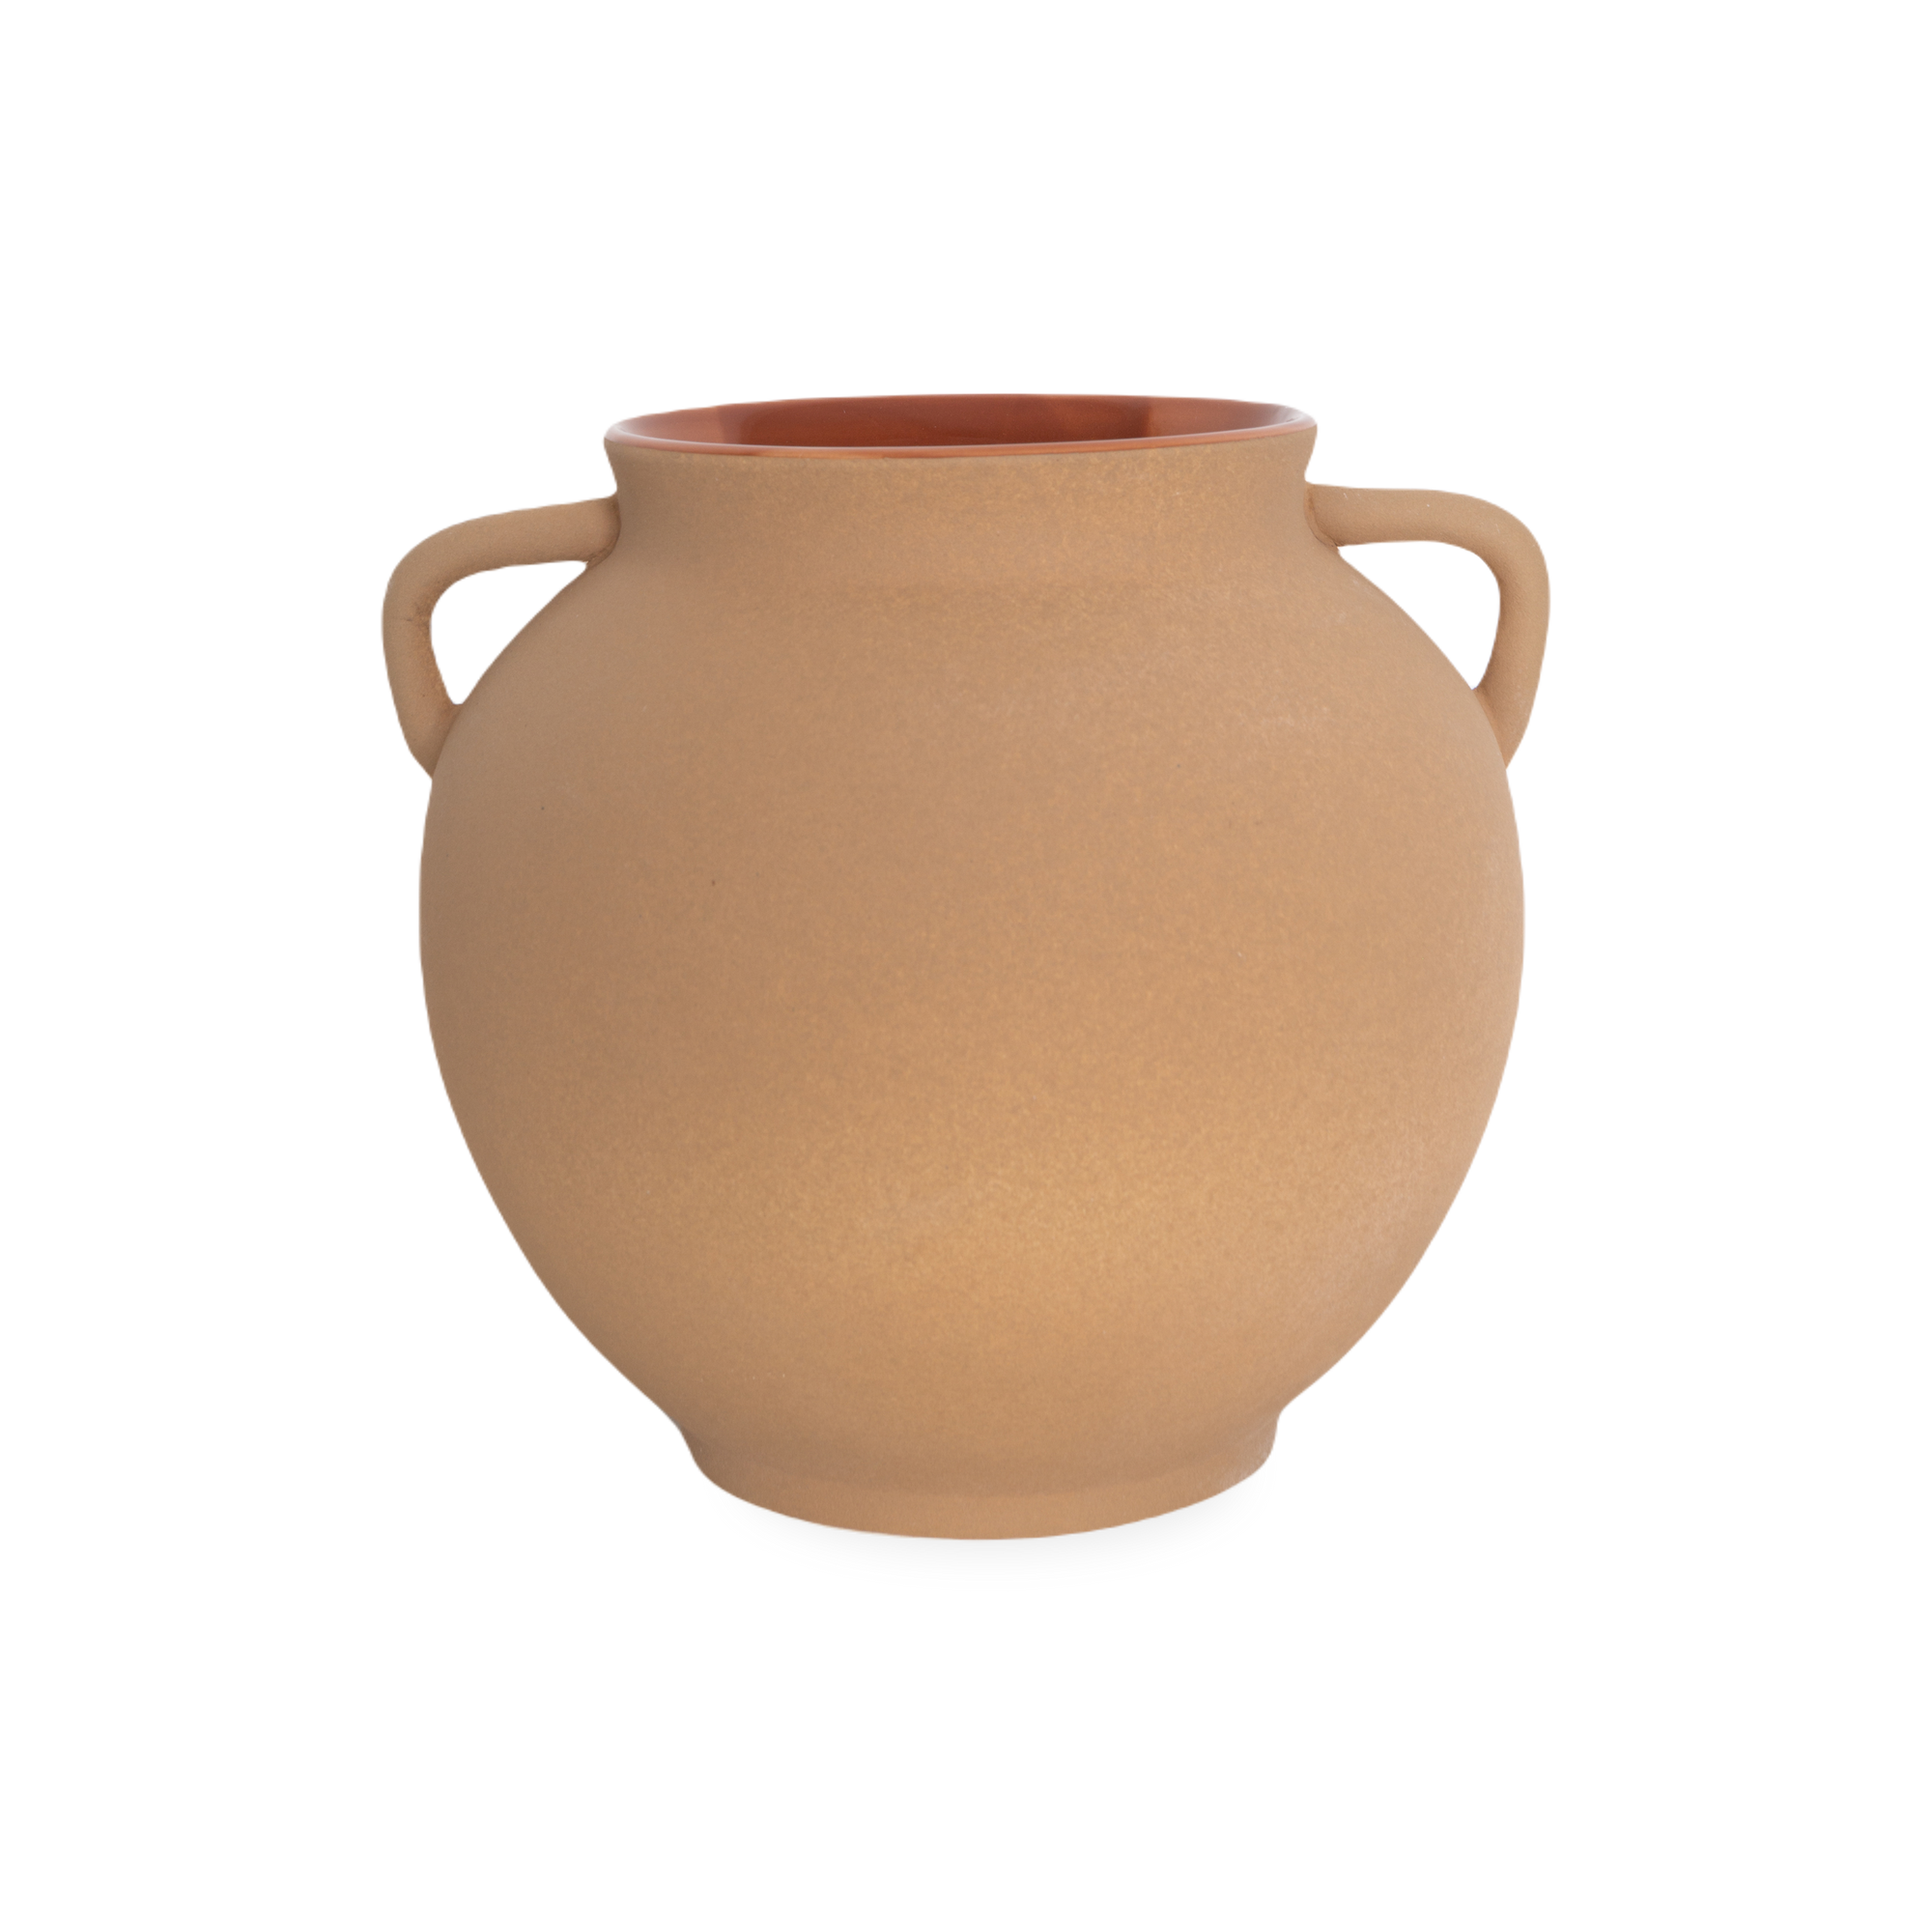 Characterized by its contemporary sculptural design and its matte finish, the Curru Urn provides an earthy aesthetic and can complement many different interior design styles.